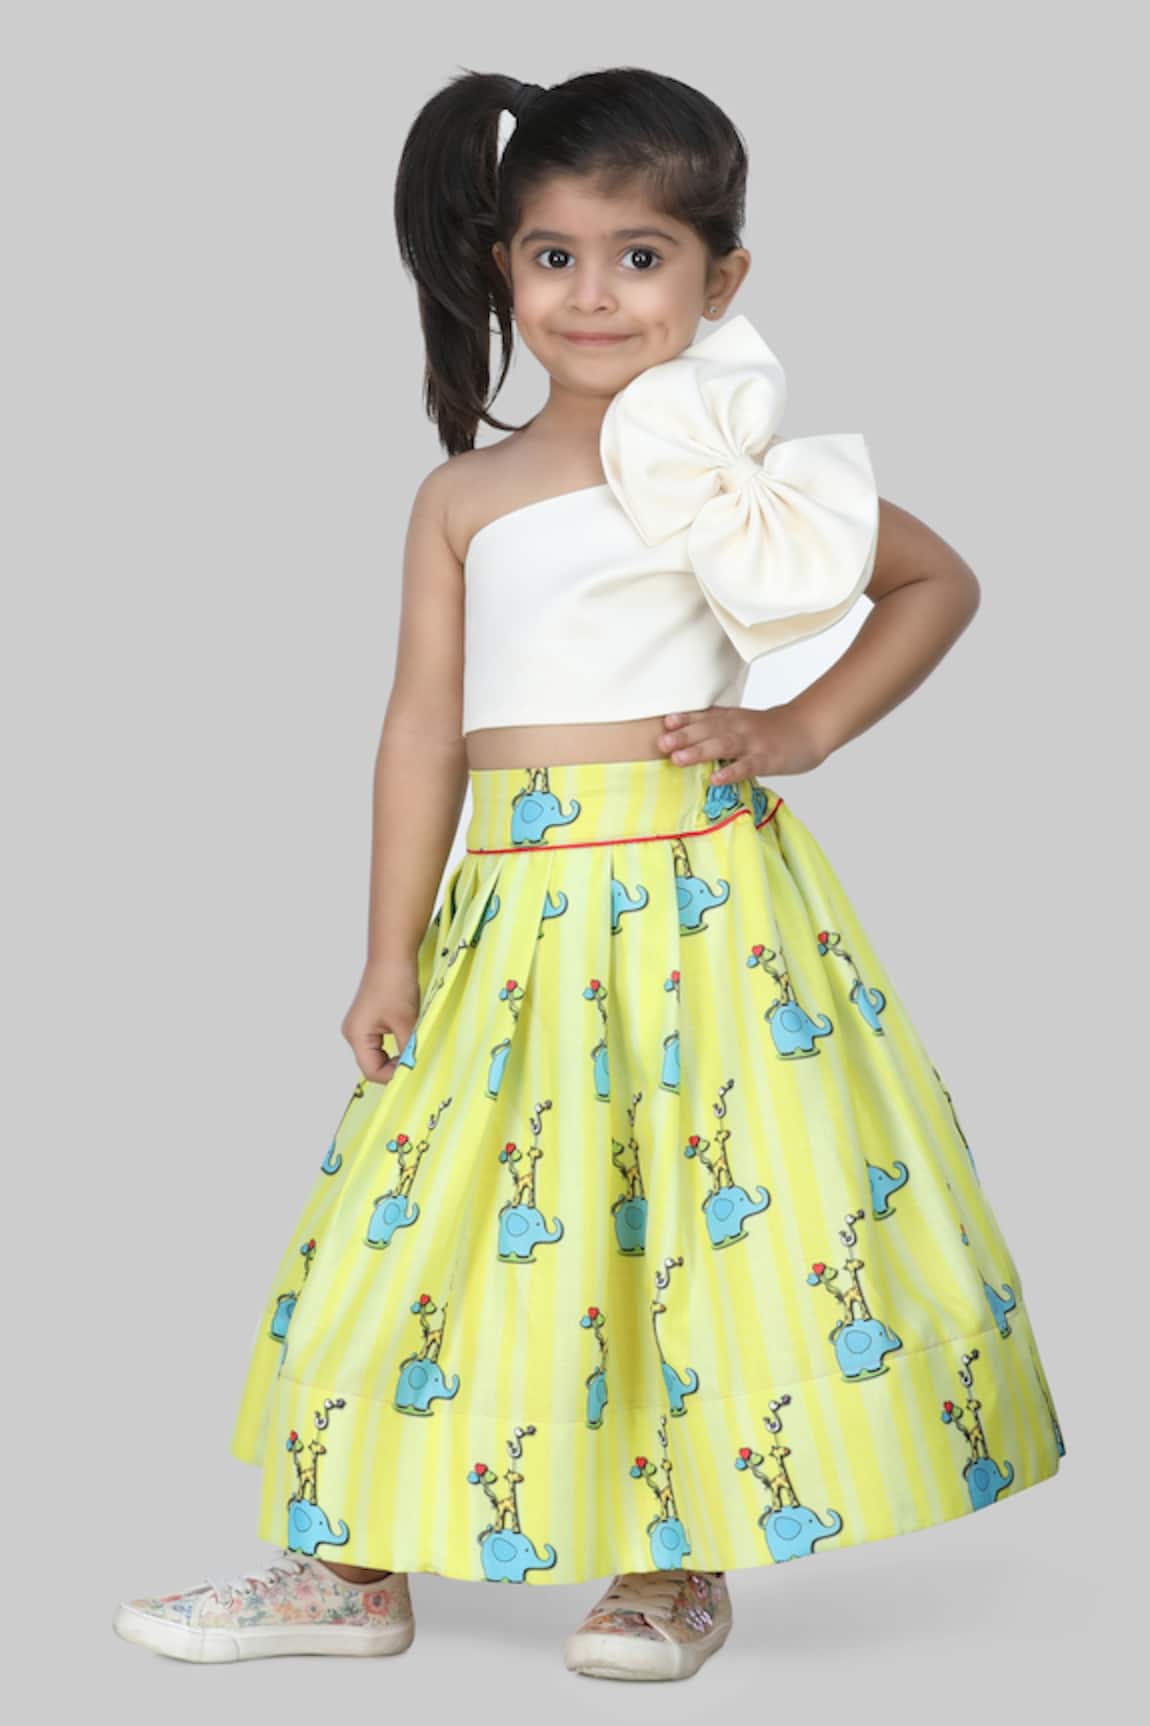 KIDS Only Skirts  Buy KIDS Only Girls Floral Print Black Skirt Online   Nykaa Fashion